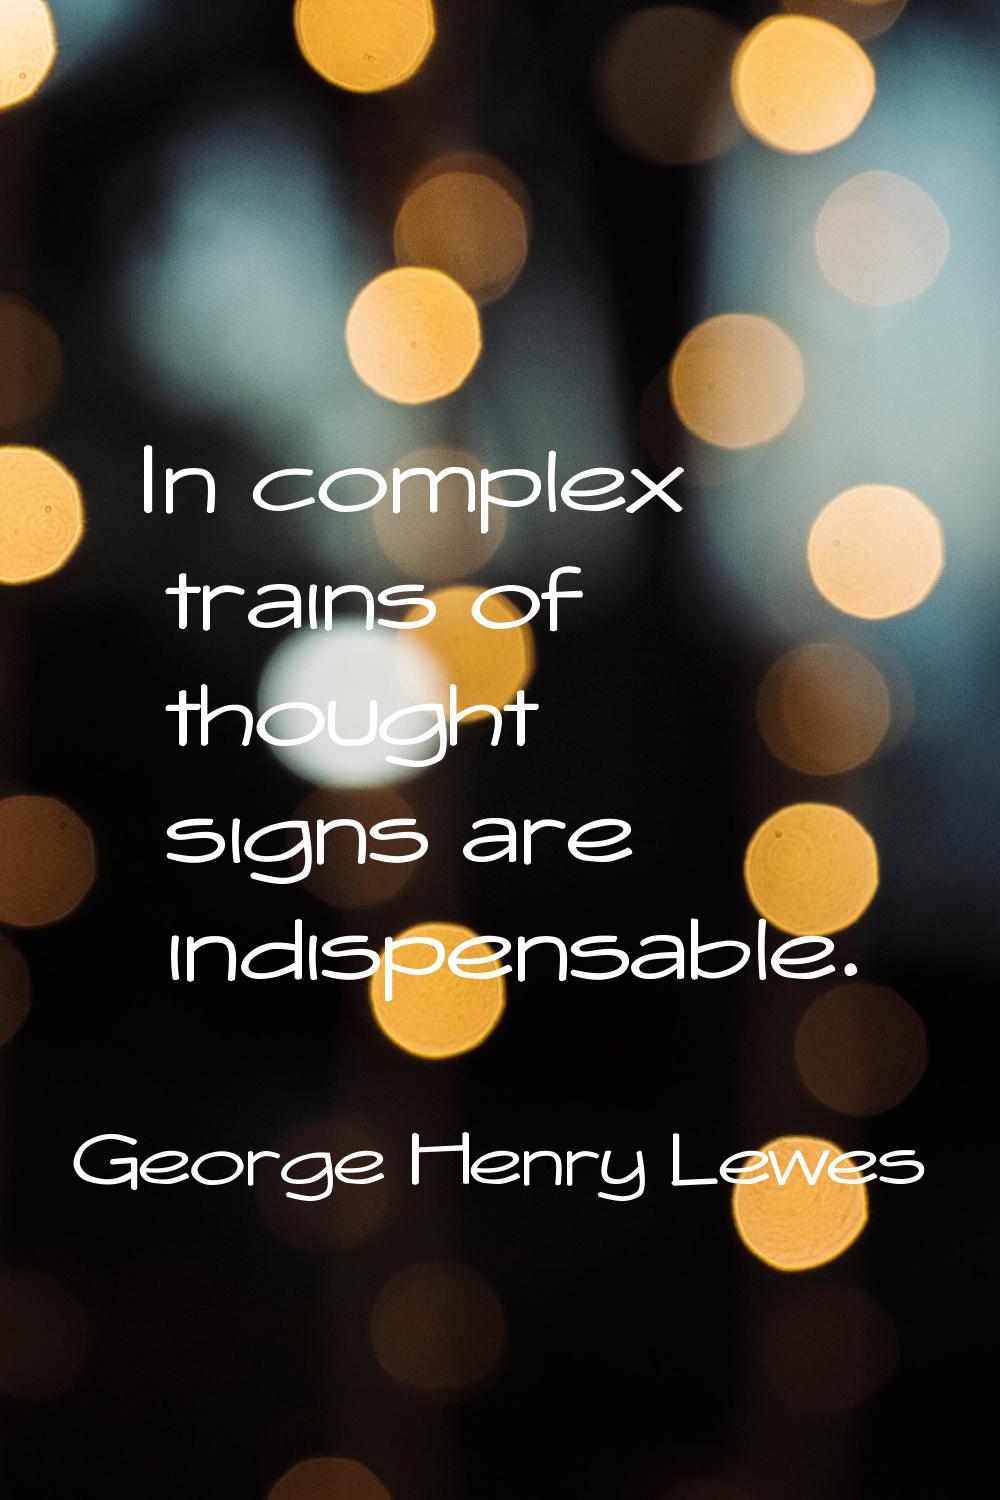 In complex trains of thought signs are indispensable.